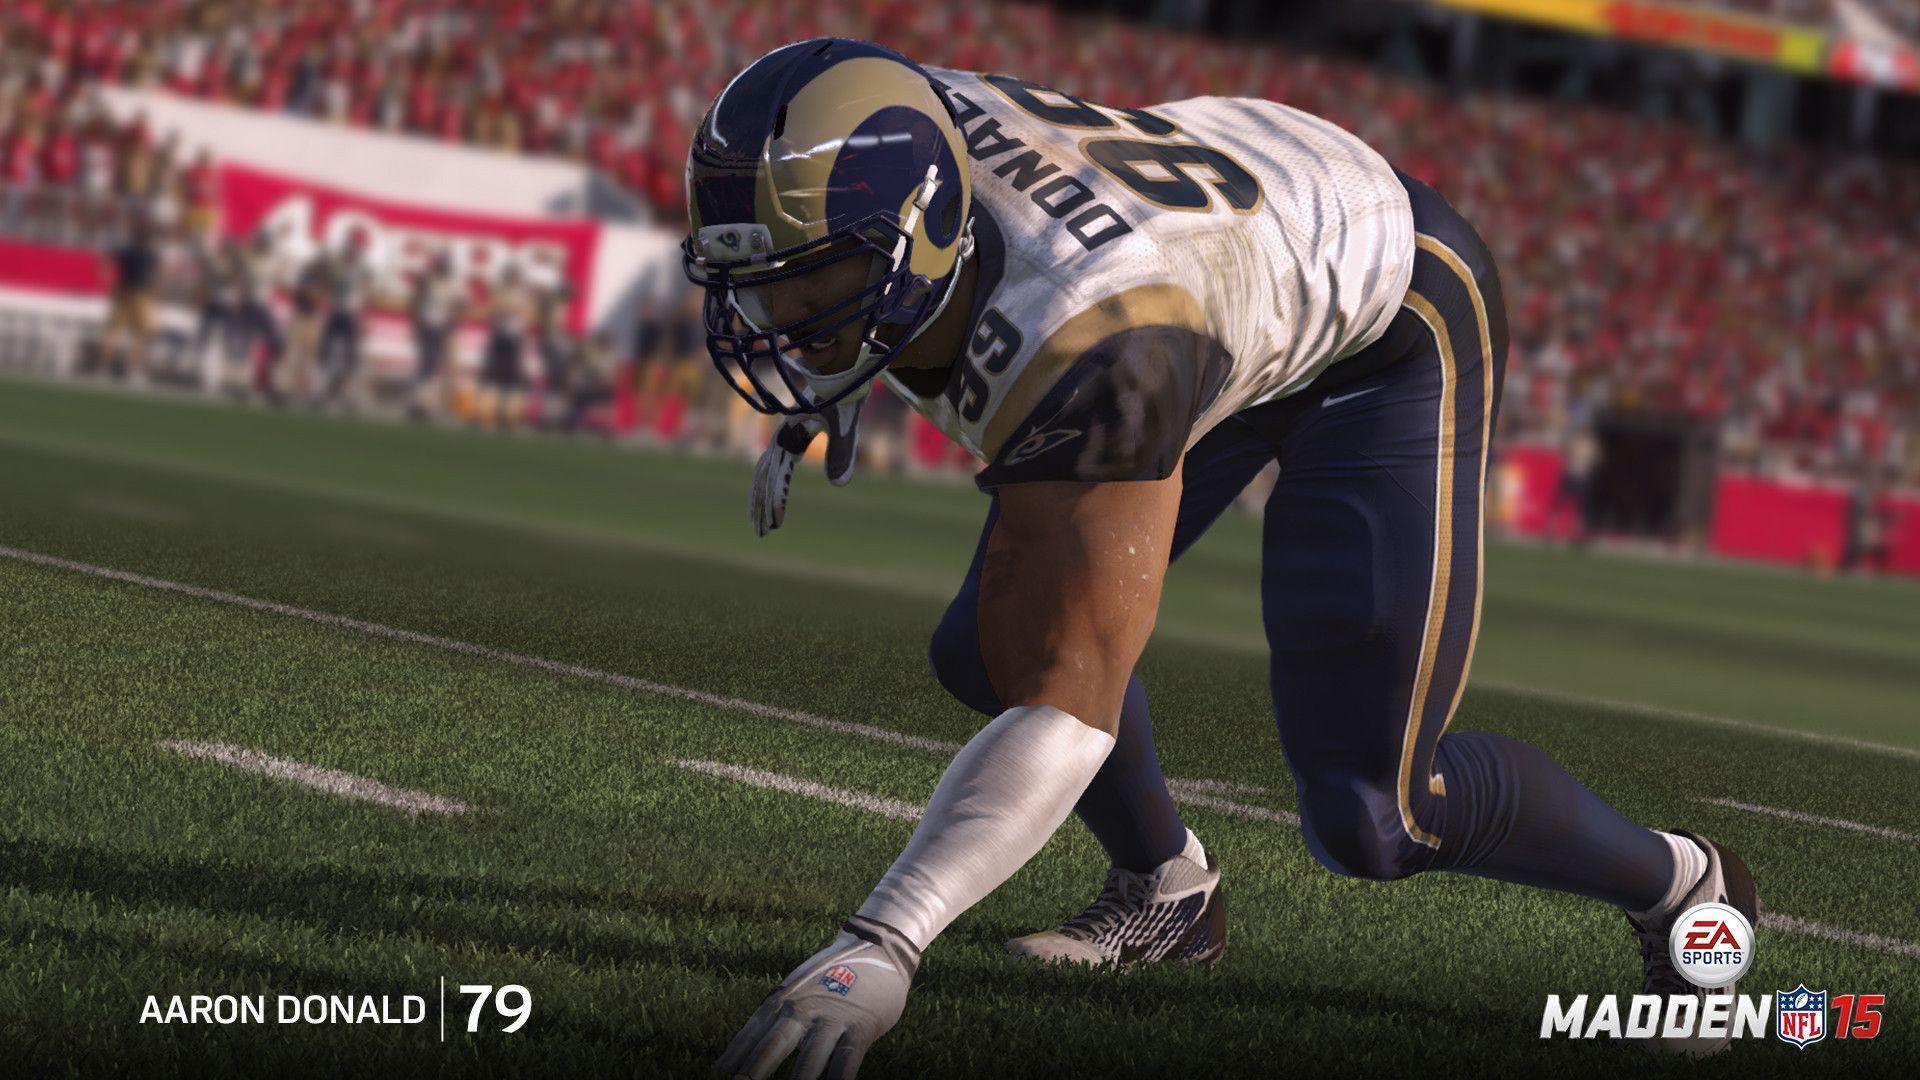 Madden 15 ratings for Greg Robinson, Aaron Donald revealed. ChatRams